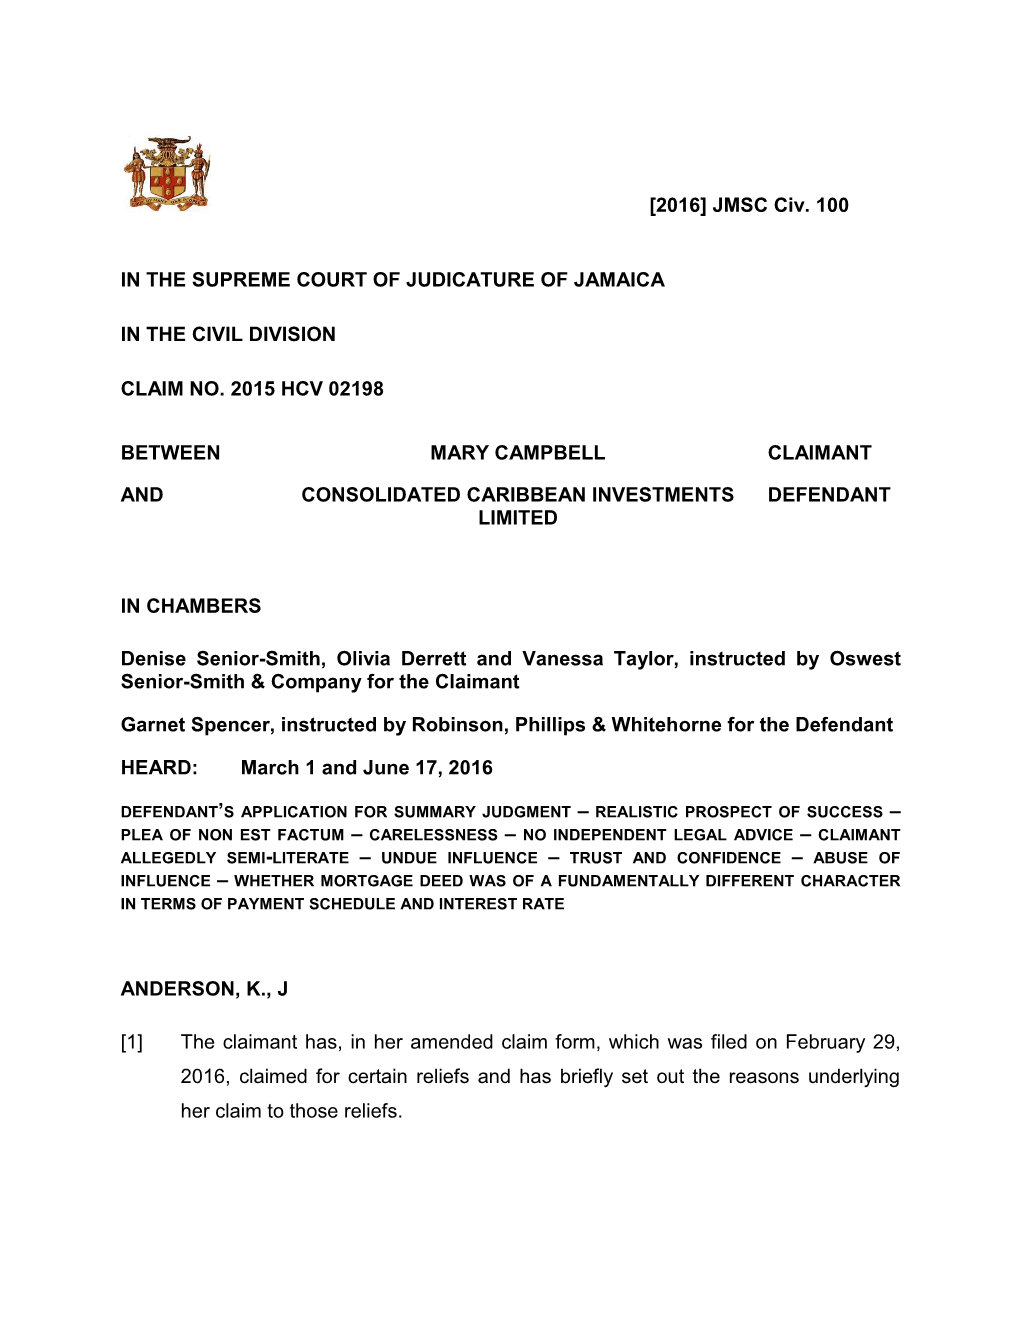 Campbell, Mary V Consolidated Caribbean Investments Limited.Pdf